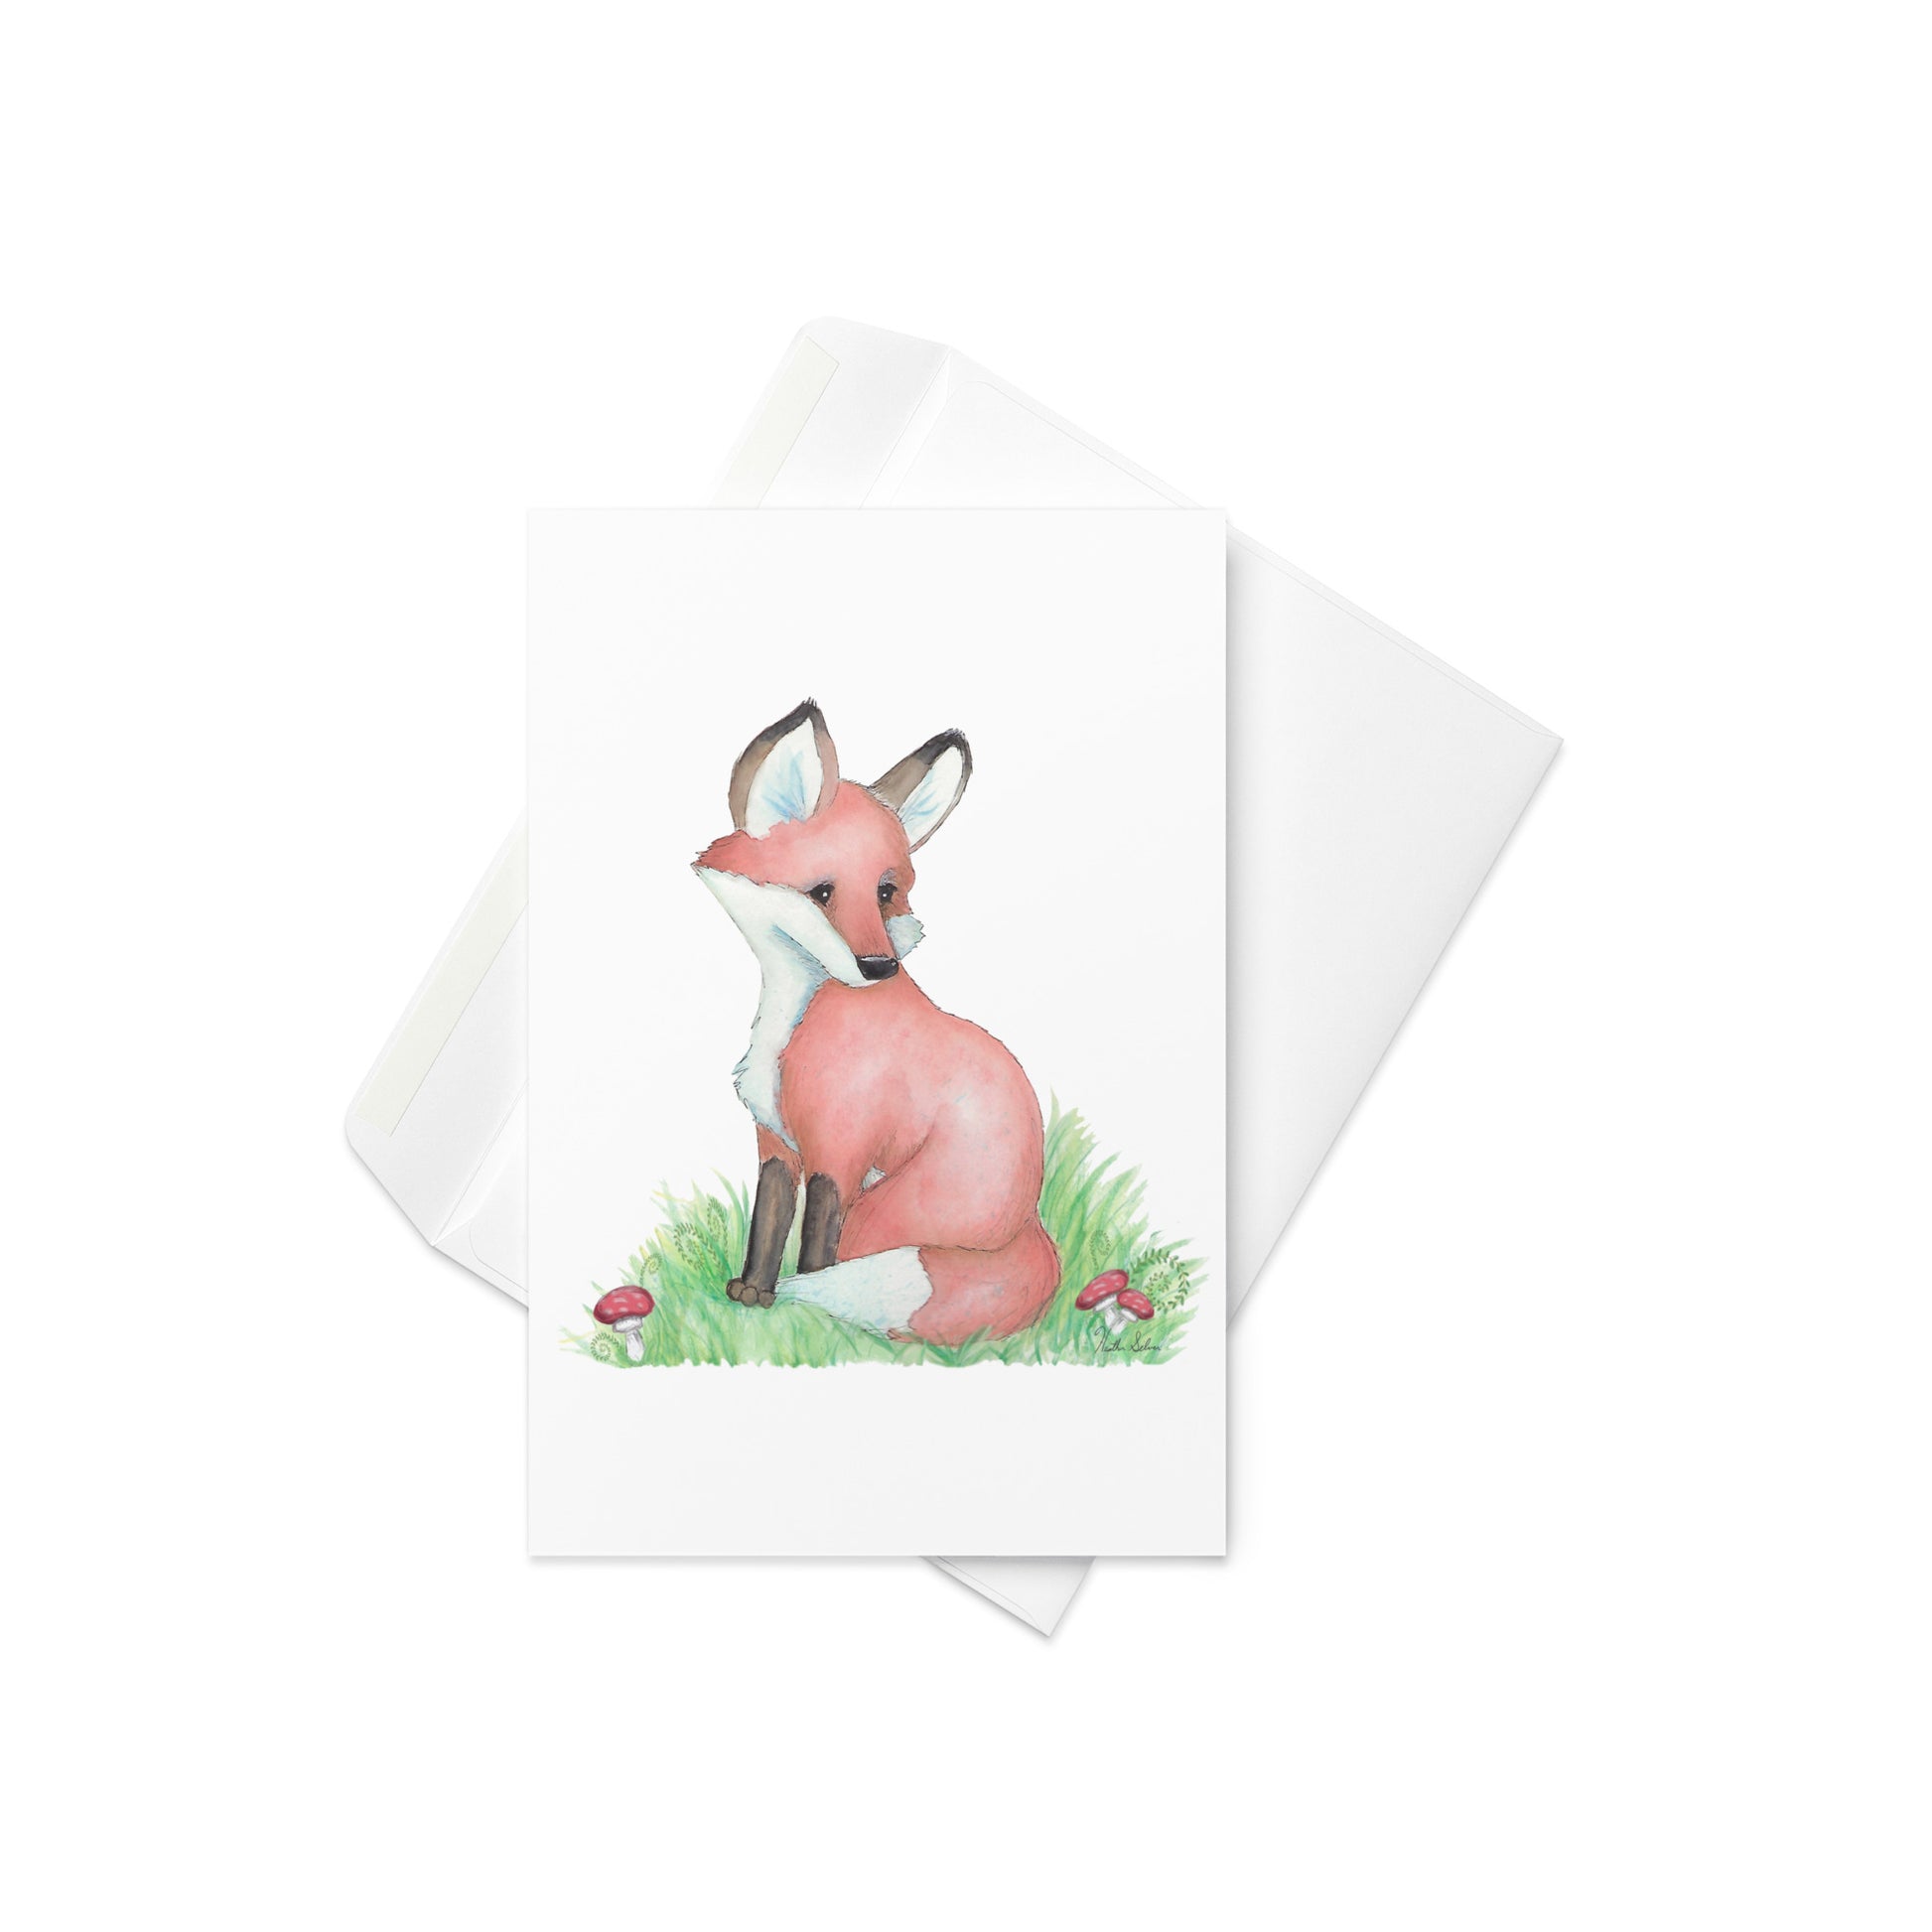 4 by 6 inch forest fox greeting card. Front has watercolor print of a fox in the grass by mushrooms and ferns. Inside is blank. Comes with a white envelope. Made of durable paperboard with vibrant printing.